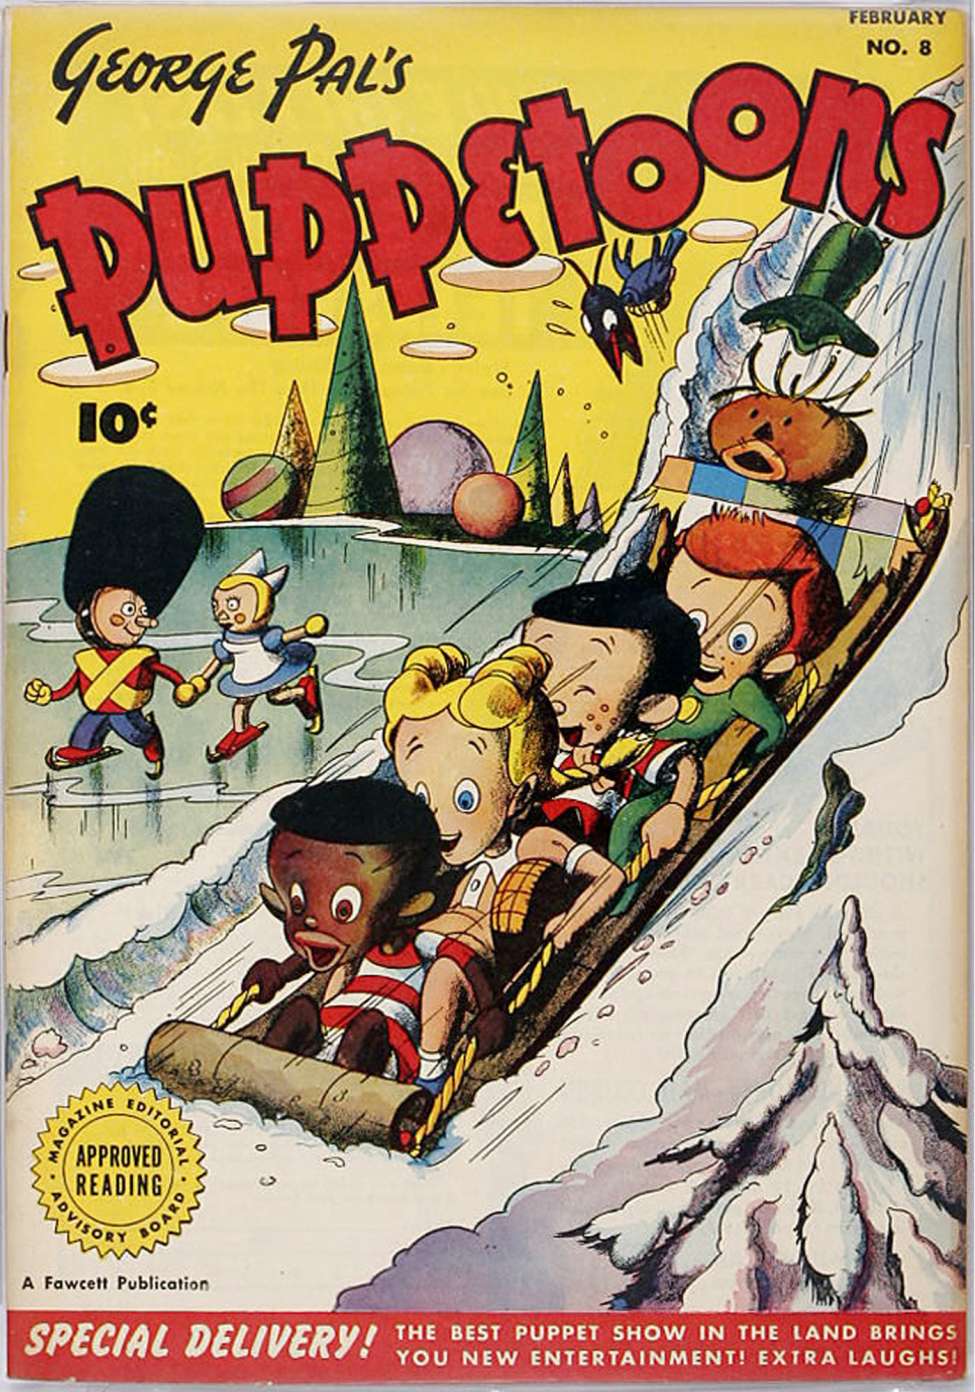 Book Cover For George Pal's Puppetoons 8